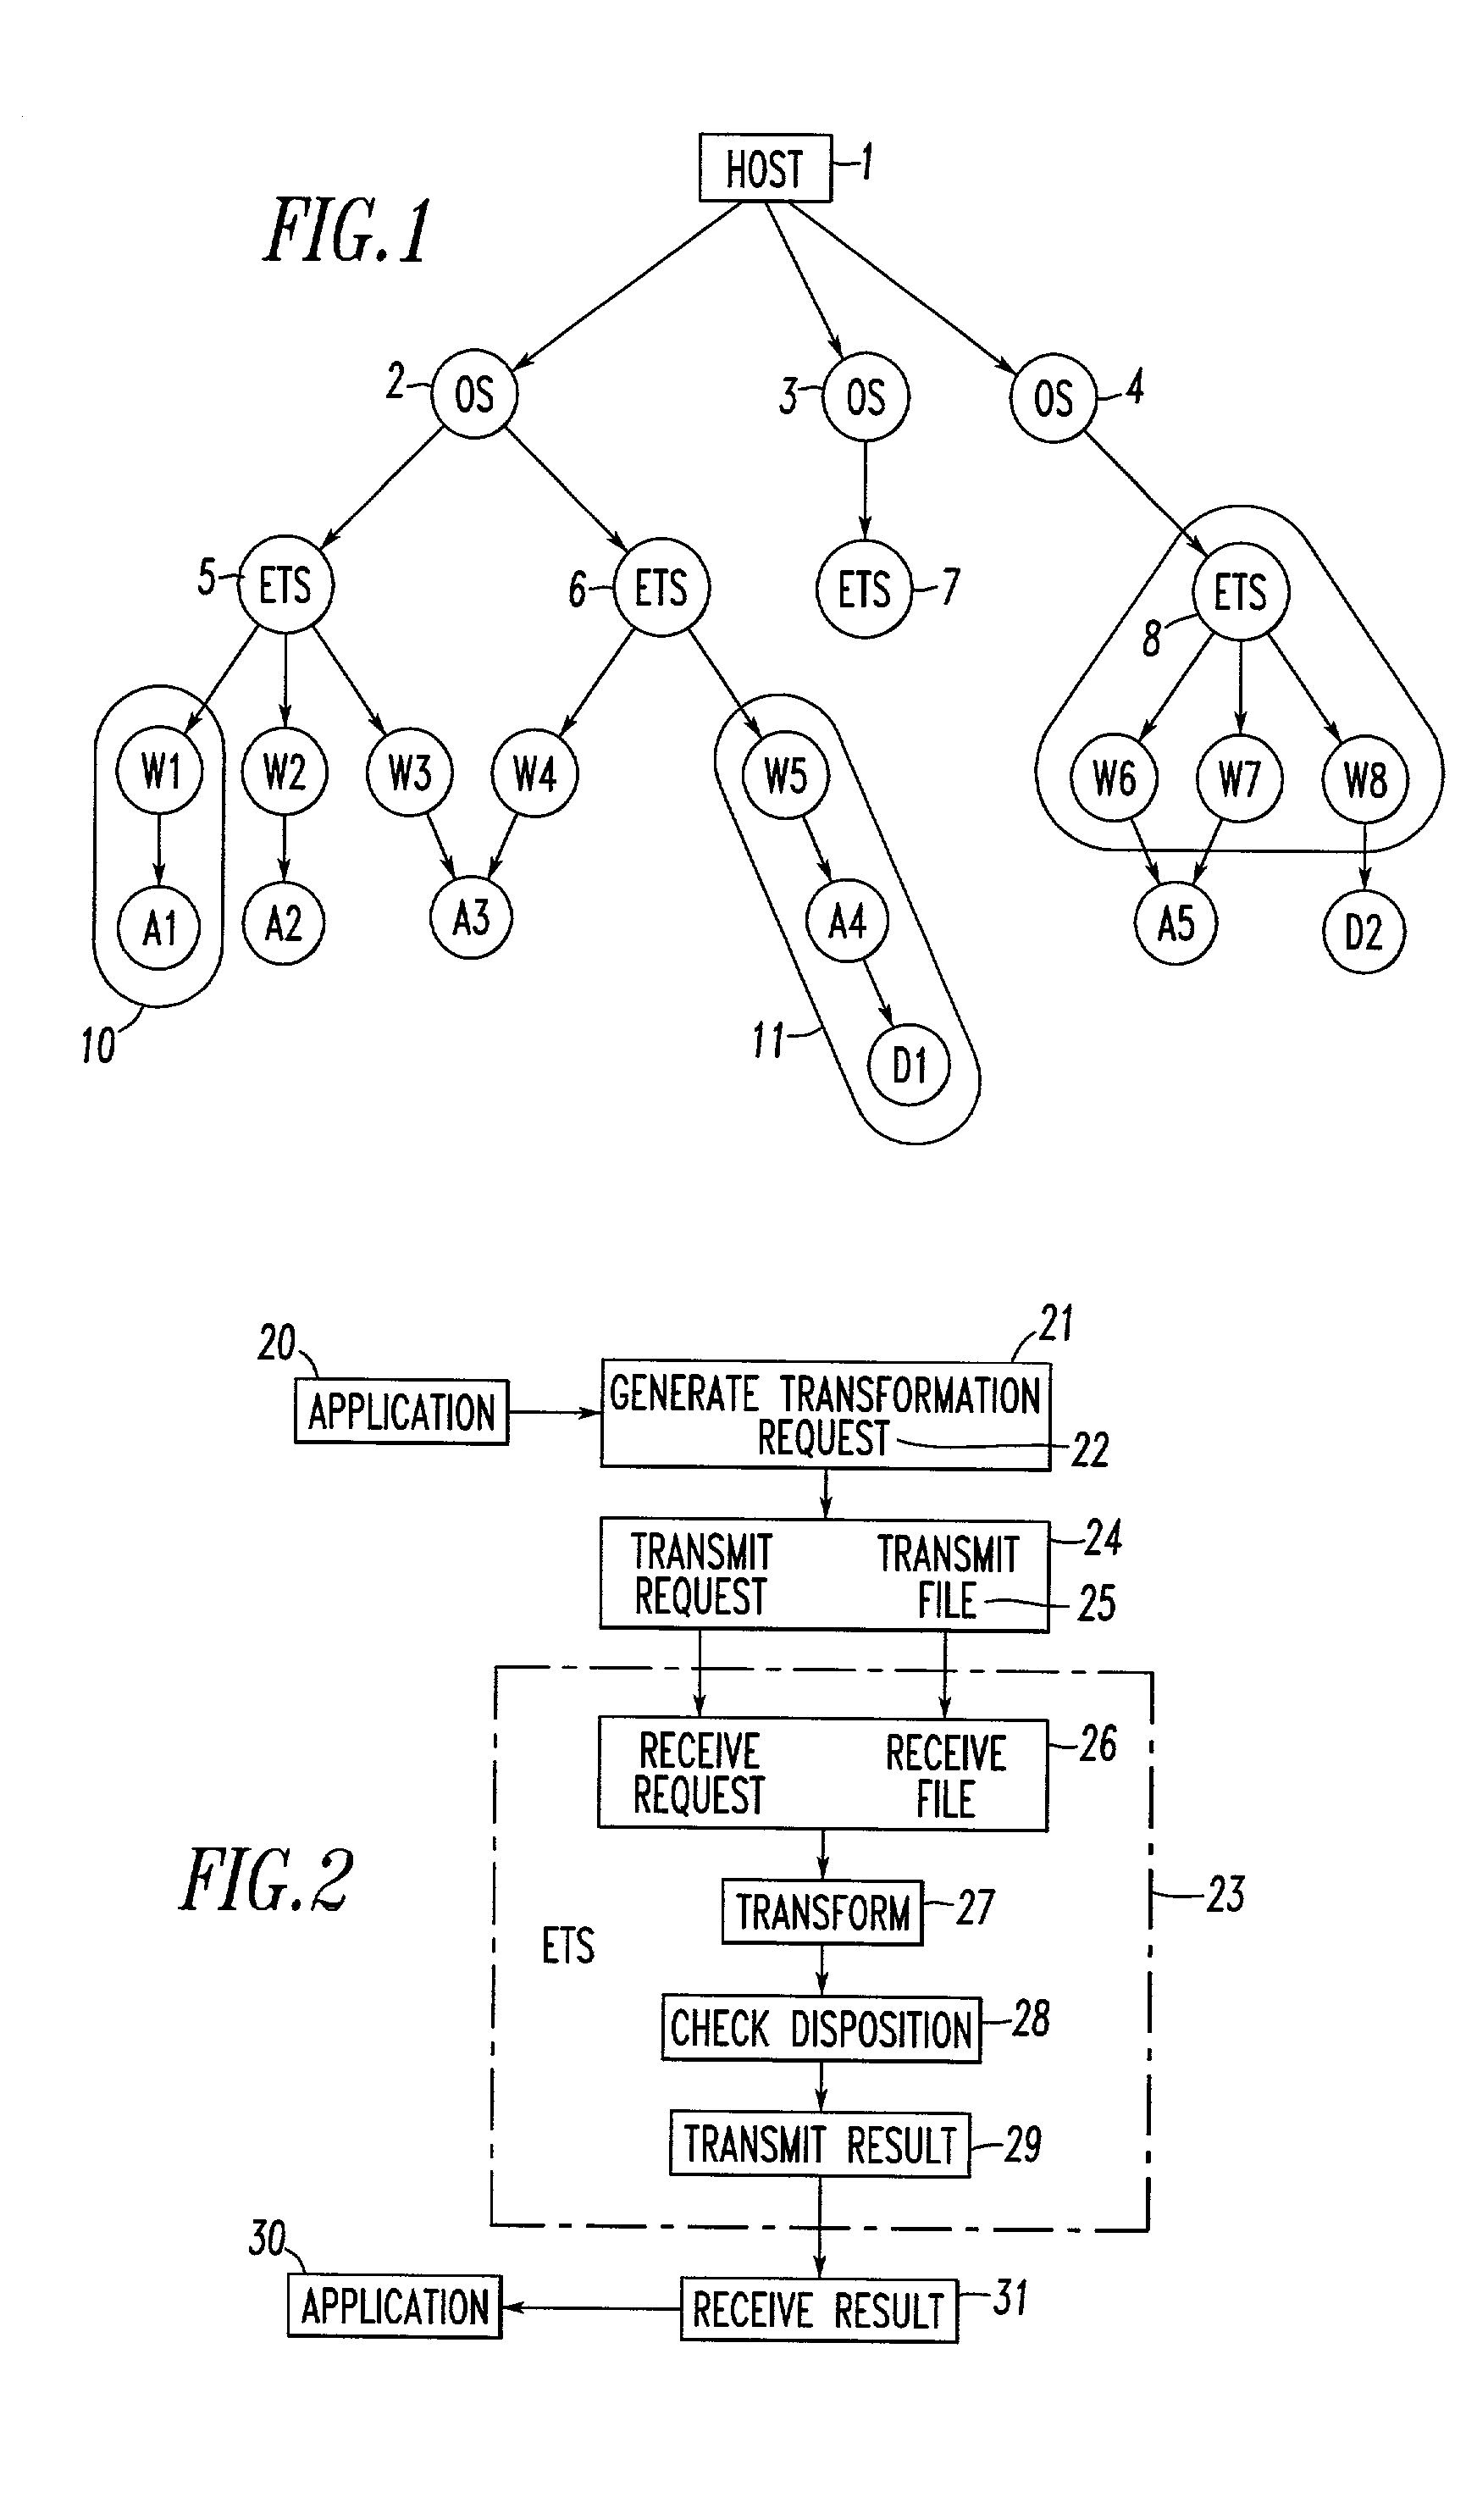 Method and system for data transformation in a heterogeneous computer system